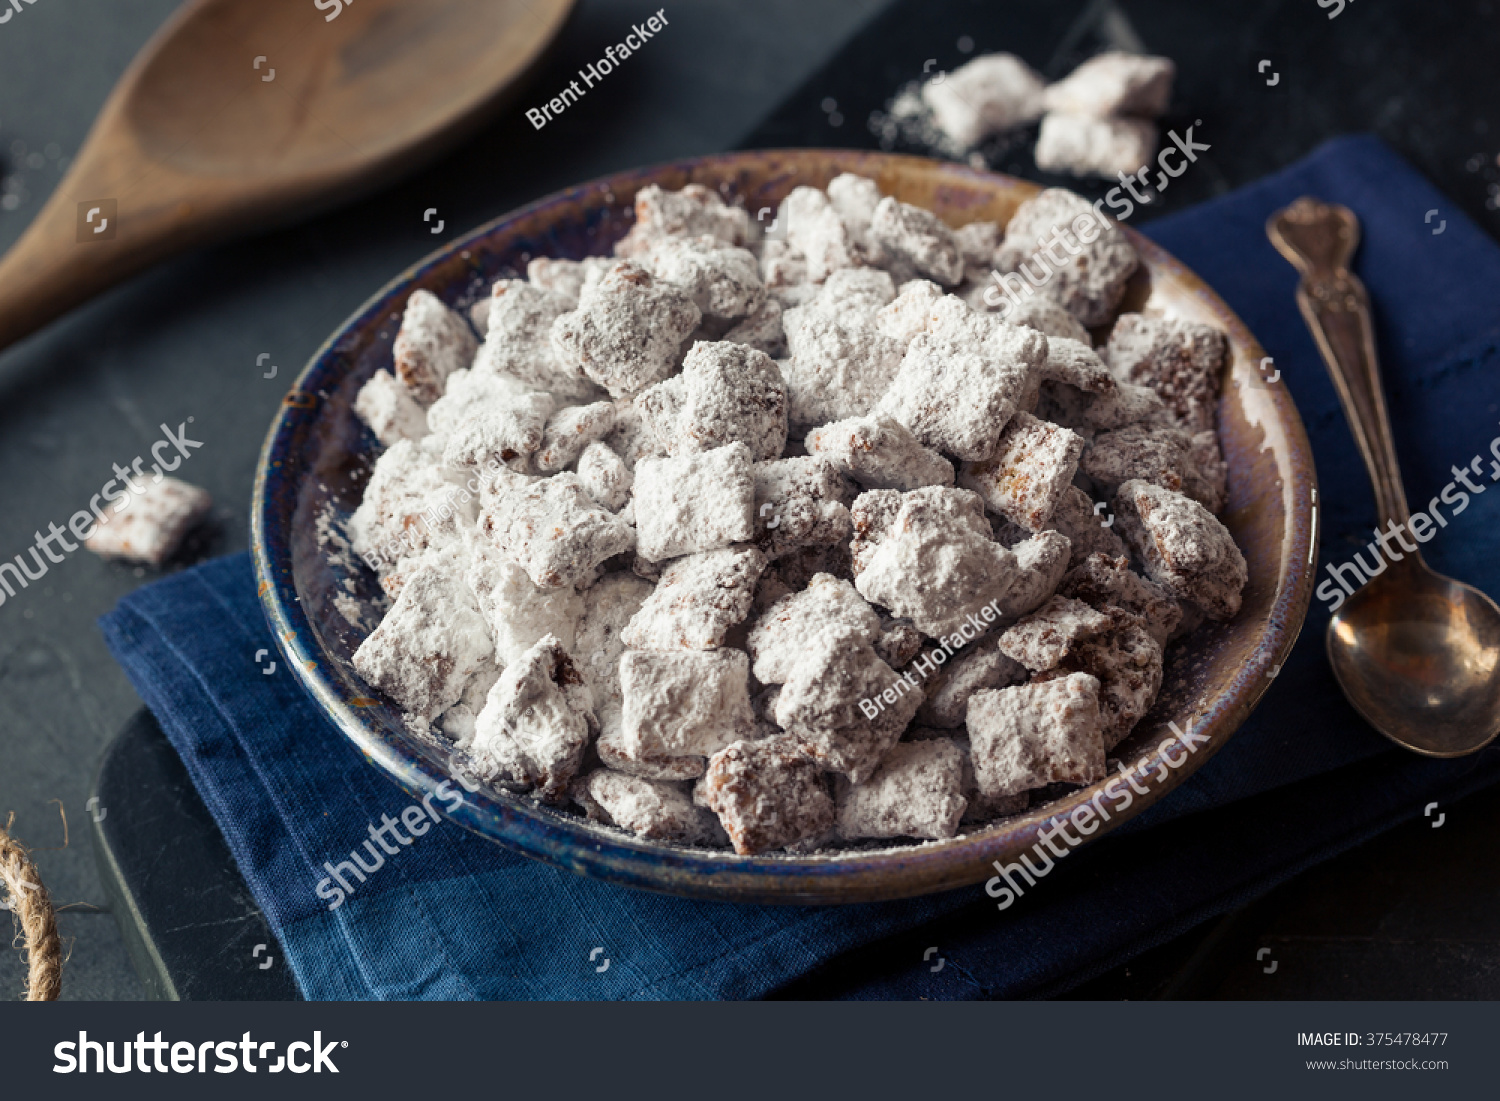 do people eat puppy chow